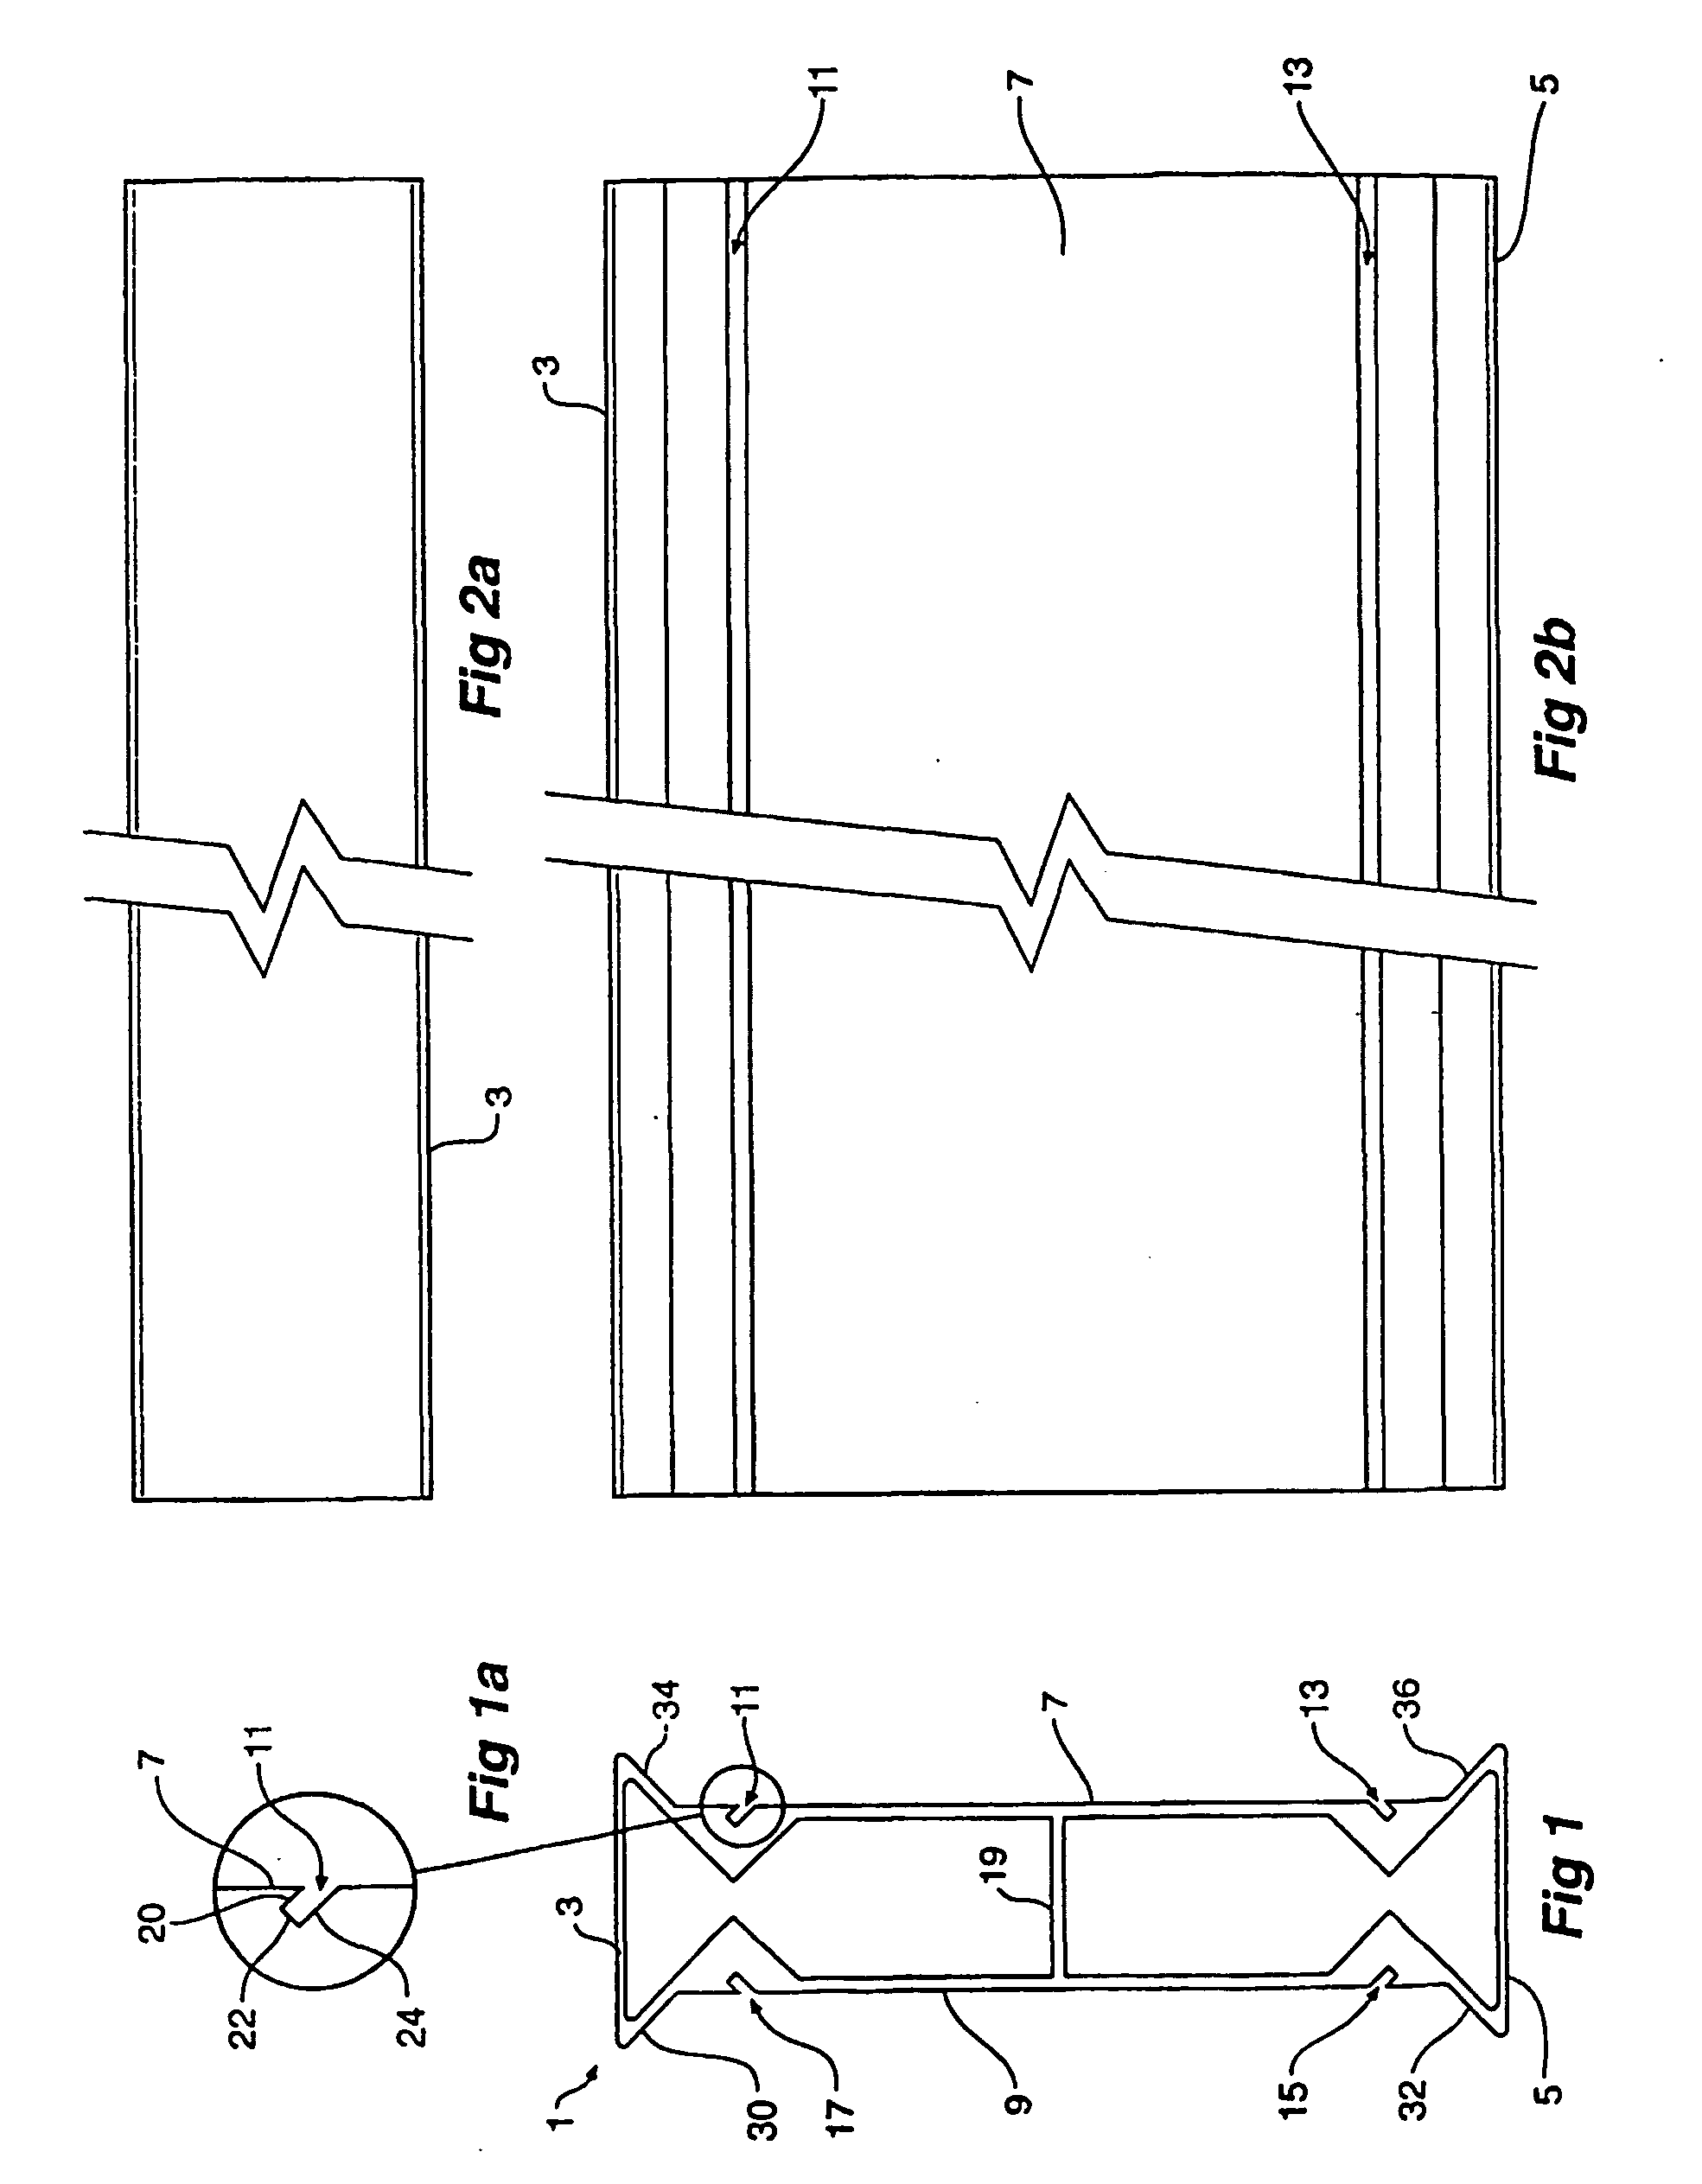 Method and apparatus for forming construction panels and structures